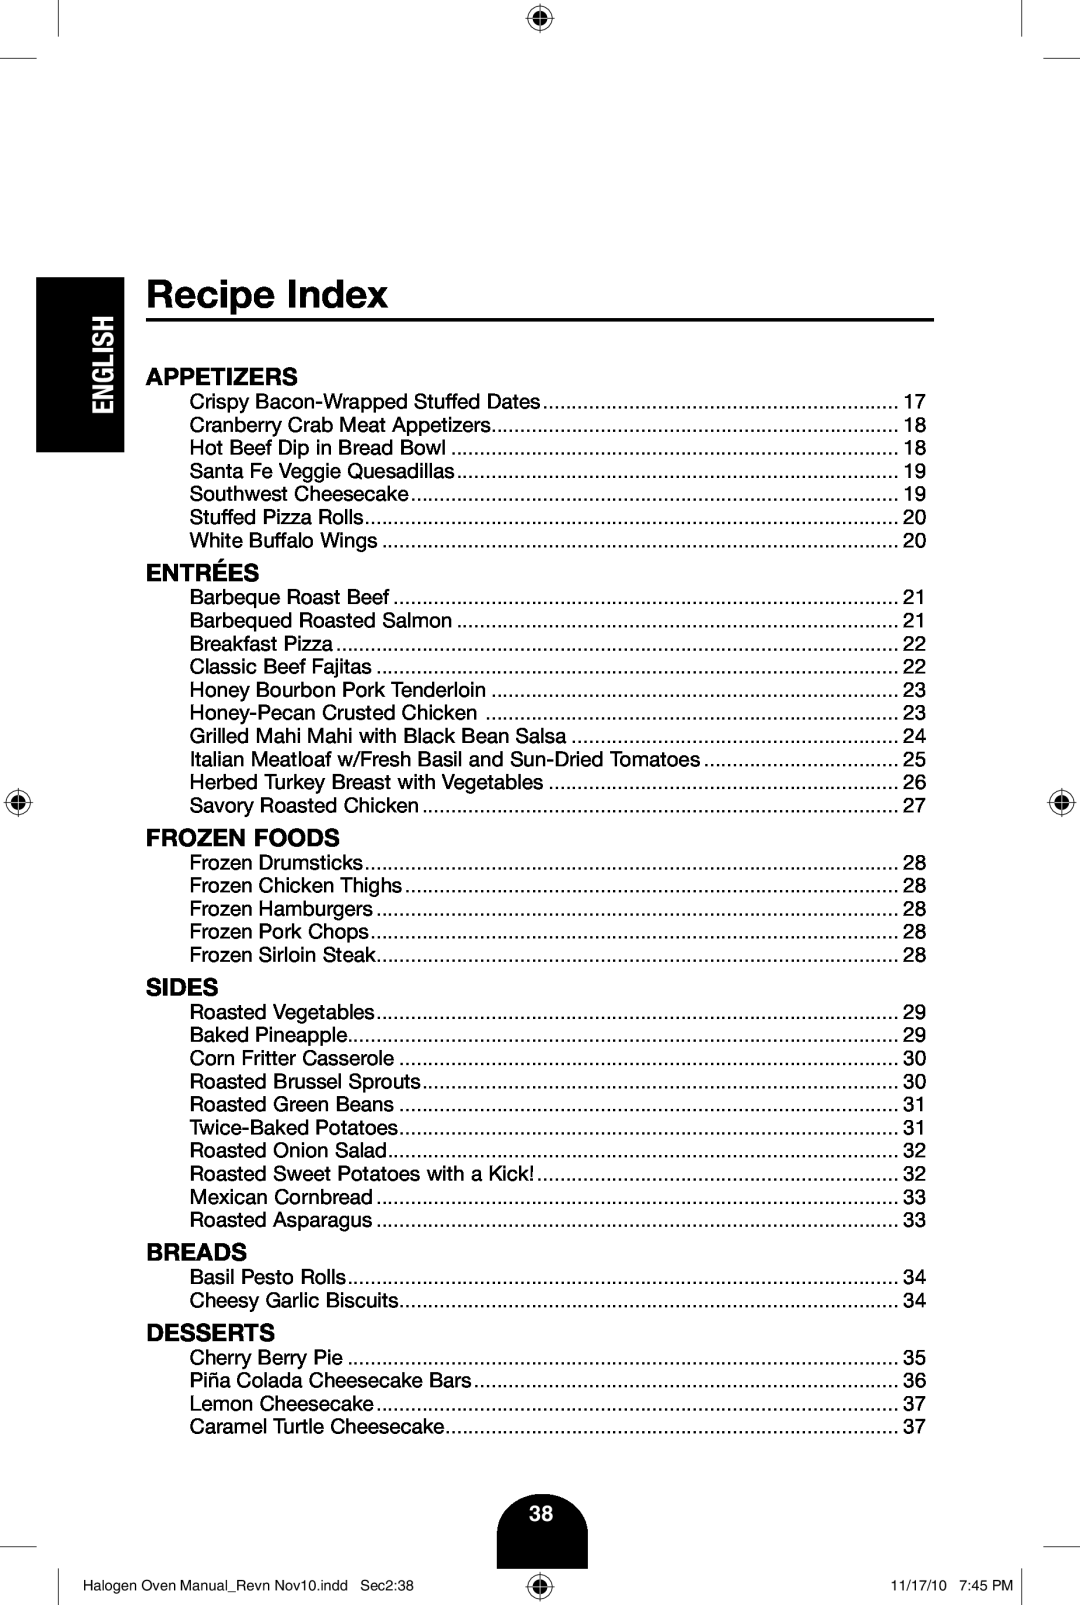 Fagor America 670040380 user manual Recipe Index, Appetizers, Entrées, Frozen Foods, Sides, Breads, Desserts, English 